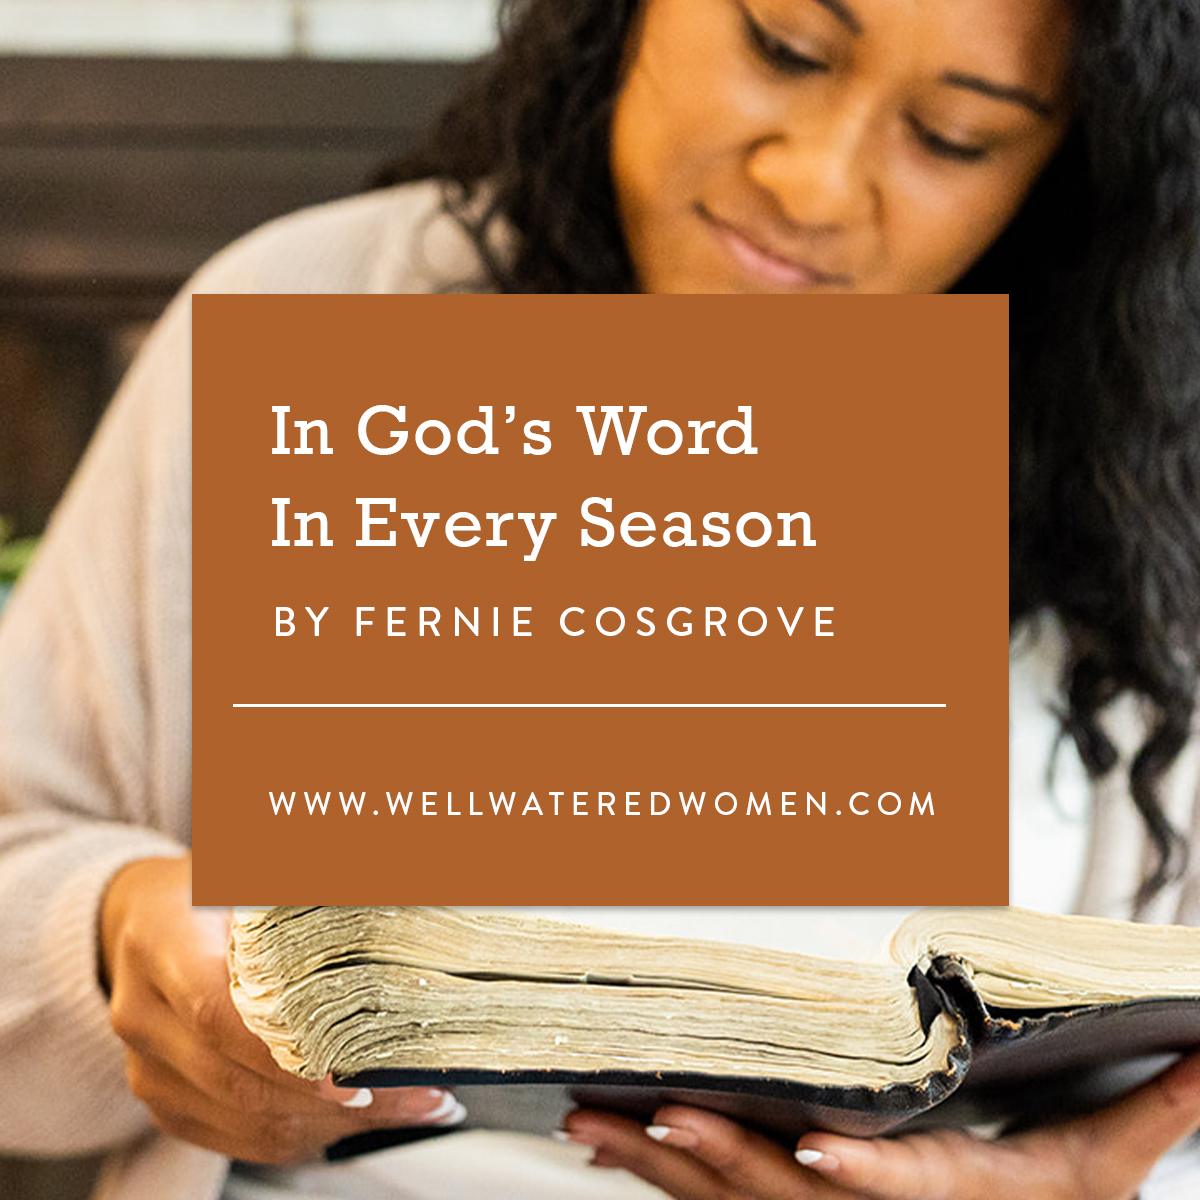 In God's Word In Every Season - an Article from Well-Watered Women